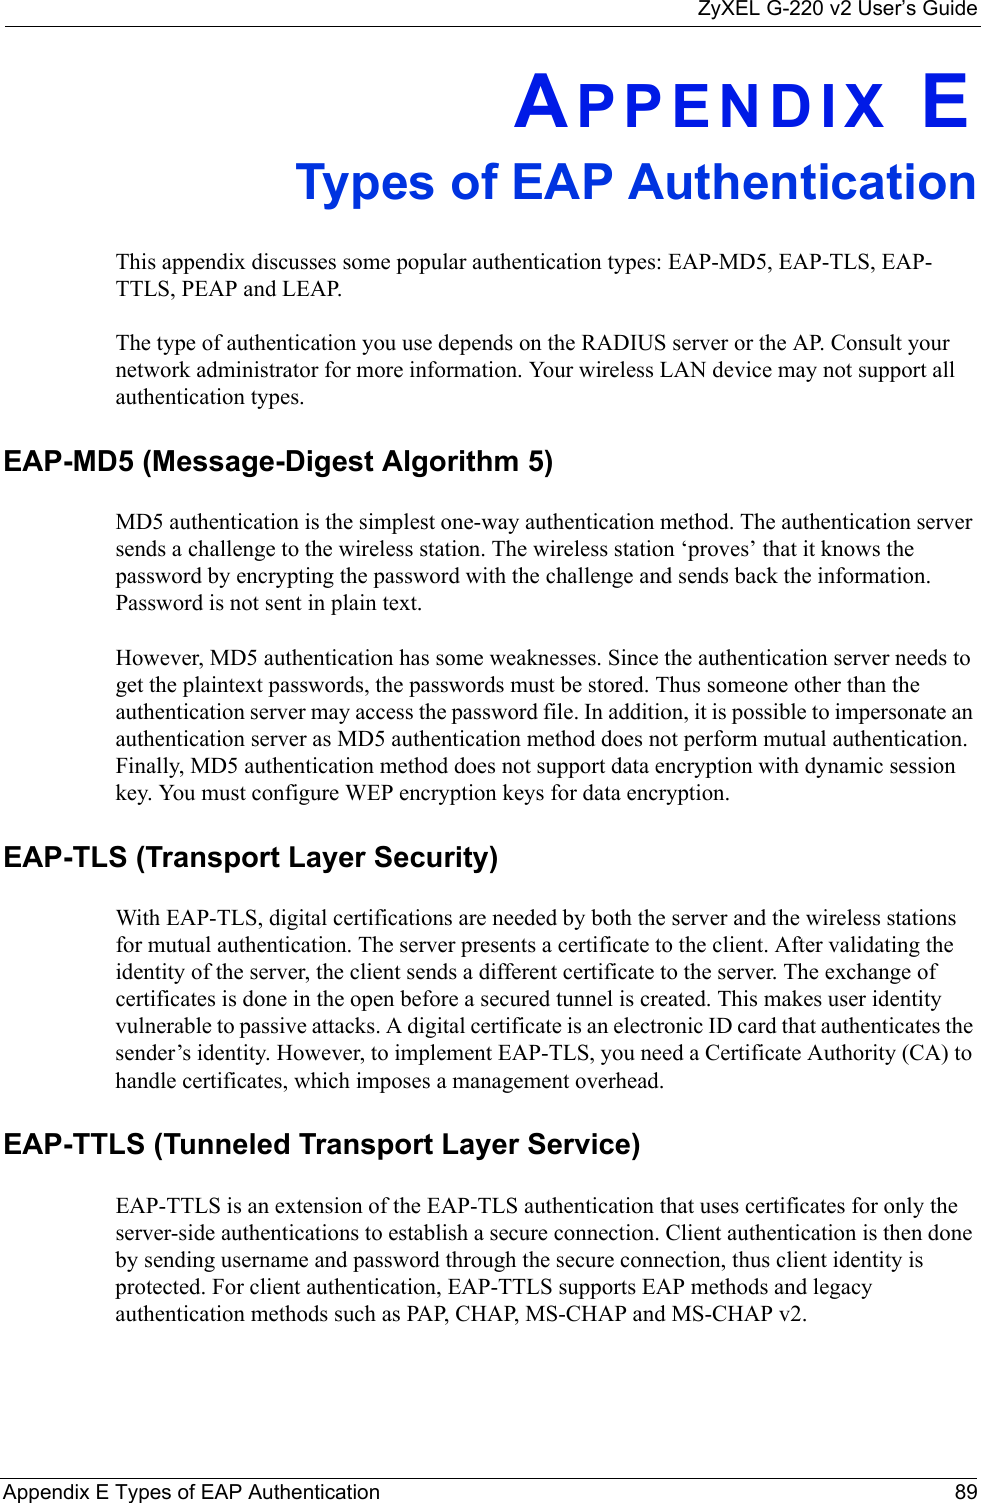 ZyXEL G-220 v2 User’s GuideAppendix E Types of EAP Authentication 89APPENDIX ETypes of EAP AuthenticationThis appendix discusses some popular authentication types: EAP-MD5, EAP-TLS, EAP-TTLS, PEAP and LEAP. The type of authentication you use depends on the RADIUS server or the AP. Consult your network administrator for more information. Your wireless LAN device may not support all authentication types. EAP-MD5 (Message-Digest Algorithm 5)MD5 authentication is the simplest one-way authentication method. The authentication server sends a challenge to the wireless station. The wireless station ‘proves’ that it knows the password by encrypting the password with the challenge and sends back the information. Password is not sent in plain text. However, MD5 authentication has some weaknesses. Since the authentication server needs to get the plaintext passwords, the passwords must be stored. Thus someone other than the authentication server may access the password file. In addition, it is possible to impersonate an authentication server as MD5 authentication method does not perform mutual authentication. Finally, MD5 authentication method does not support data encryption with dynamic session key. You must configure WEP encryption keys for data encryption. EAP-TLS (Transport Layer Security)With EAP-TLS, digital certifications are needed by both the server and the wireless stations for mutual authentication. The server presents a certificate to the client. After validating the identity of the server, the client sends a different certificate to the server. The exchange of certificates is done in the open before a secured tunnel is created. This makes user identity vulnerable to passive attacks. A digital certificate is an electronic ID card that authenticates the sender’s identity. However, to implement EAP-TLS, you need a Certificate Authority (CA) to handle certificates, which imposes a management overhead. EAP-TTLS (Tunneled Transport Layer Service) EAP-TTLS is an extension of the EAP-TLS authentication that uses certificates for only the server-side authentications to establish a secure connection. Client authentication is then done by sending username and password through the secure connection, thus client identity is protected. For client authentication, EAP-TTLS supports EAP methods and legacy authentication methods such as PAP, CHAP, MS-CHAP and MS-CHAP v2. 